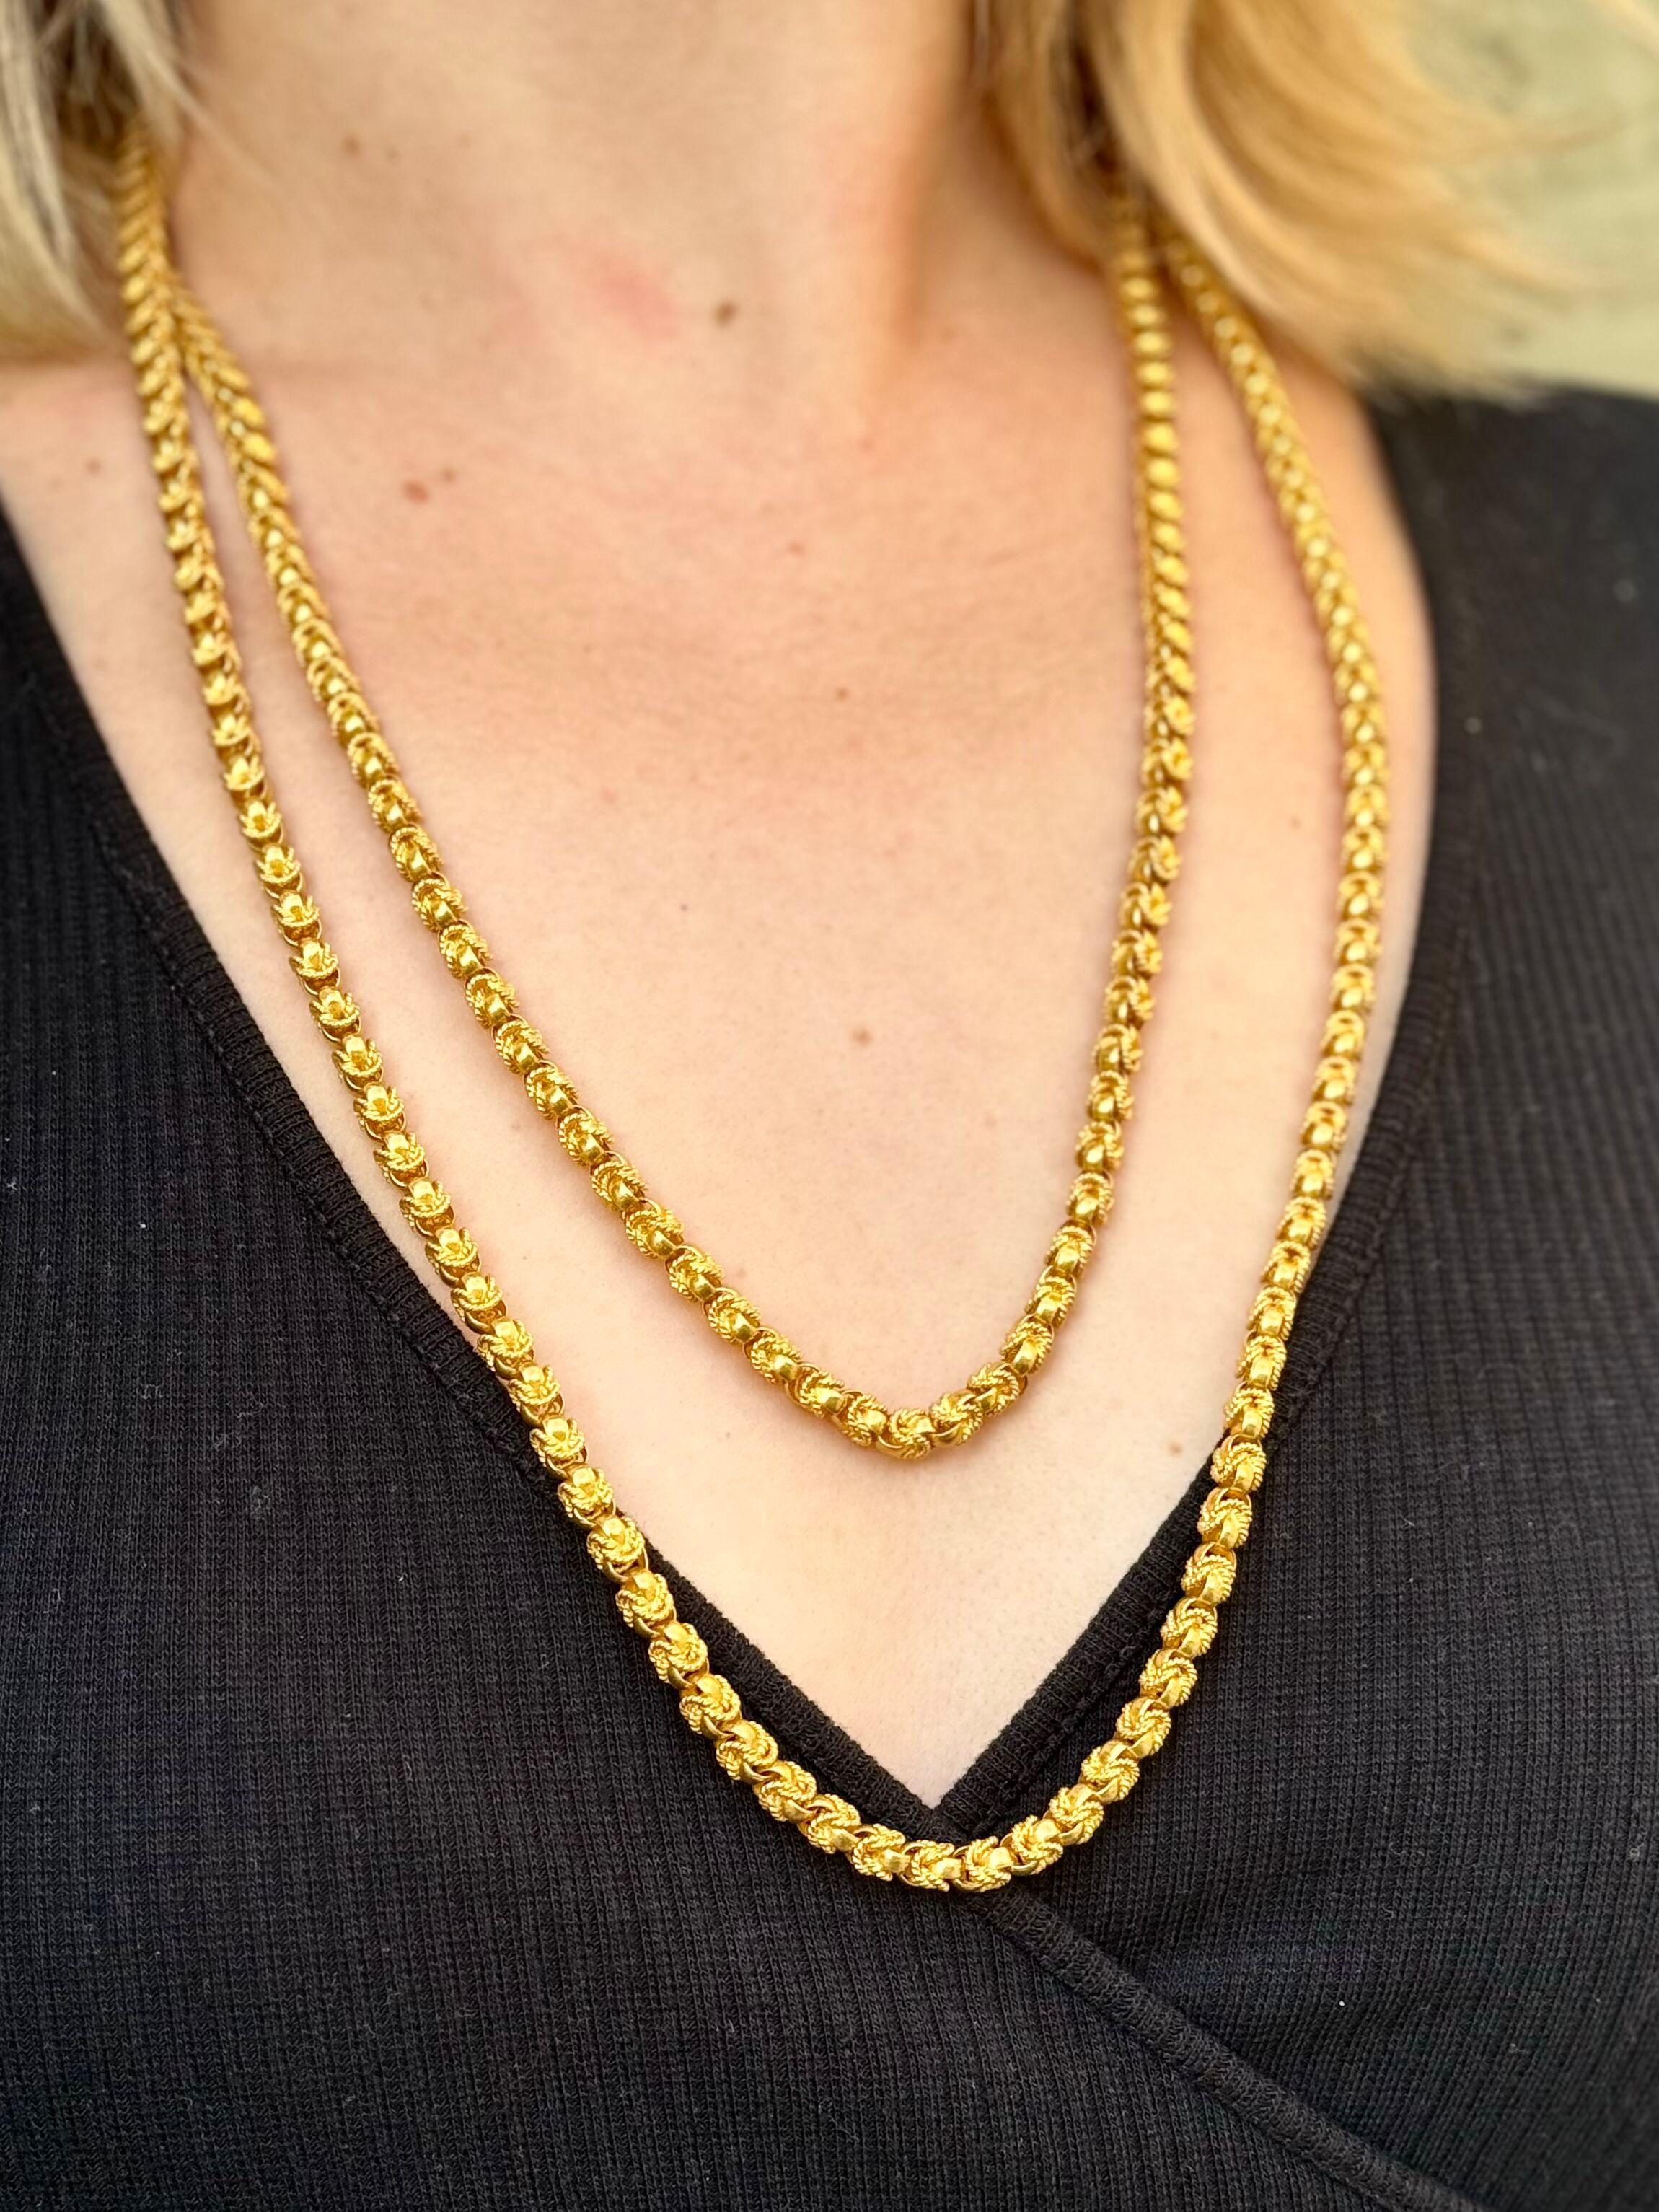 Intricate Link Extra Long Gold Chain Necklace For Sale 2